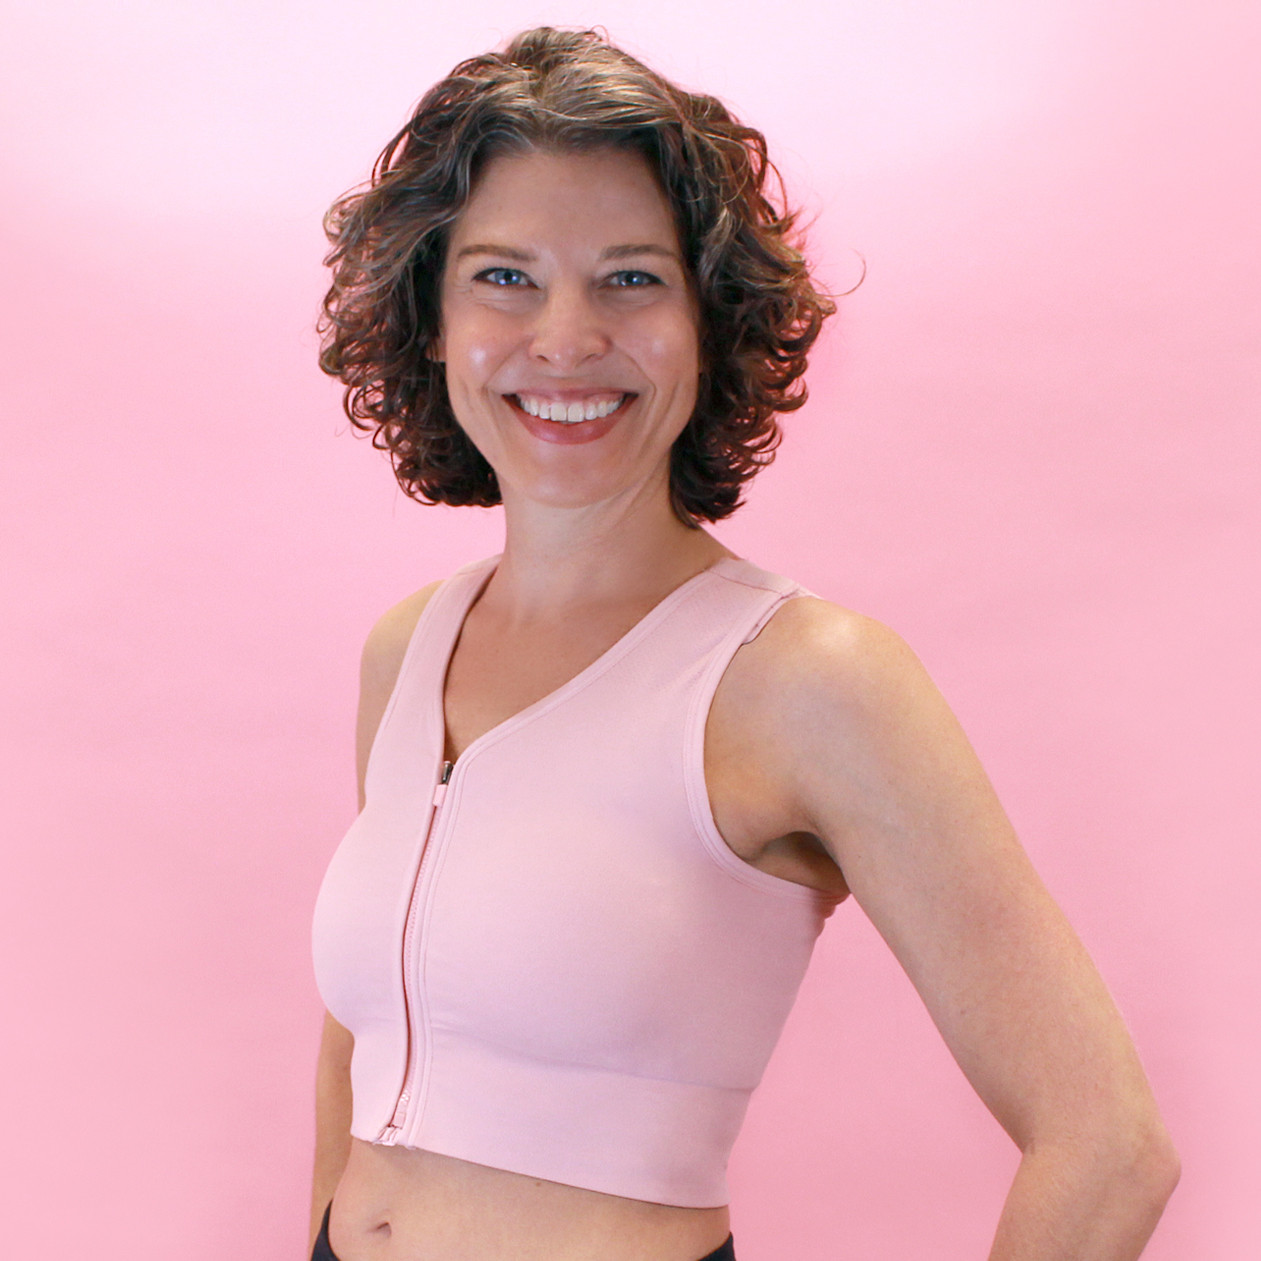 Top Compression Garments for Post-Breast Cancer Lymphedema